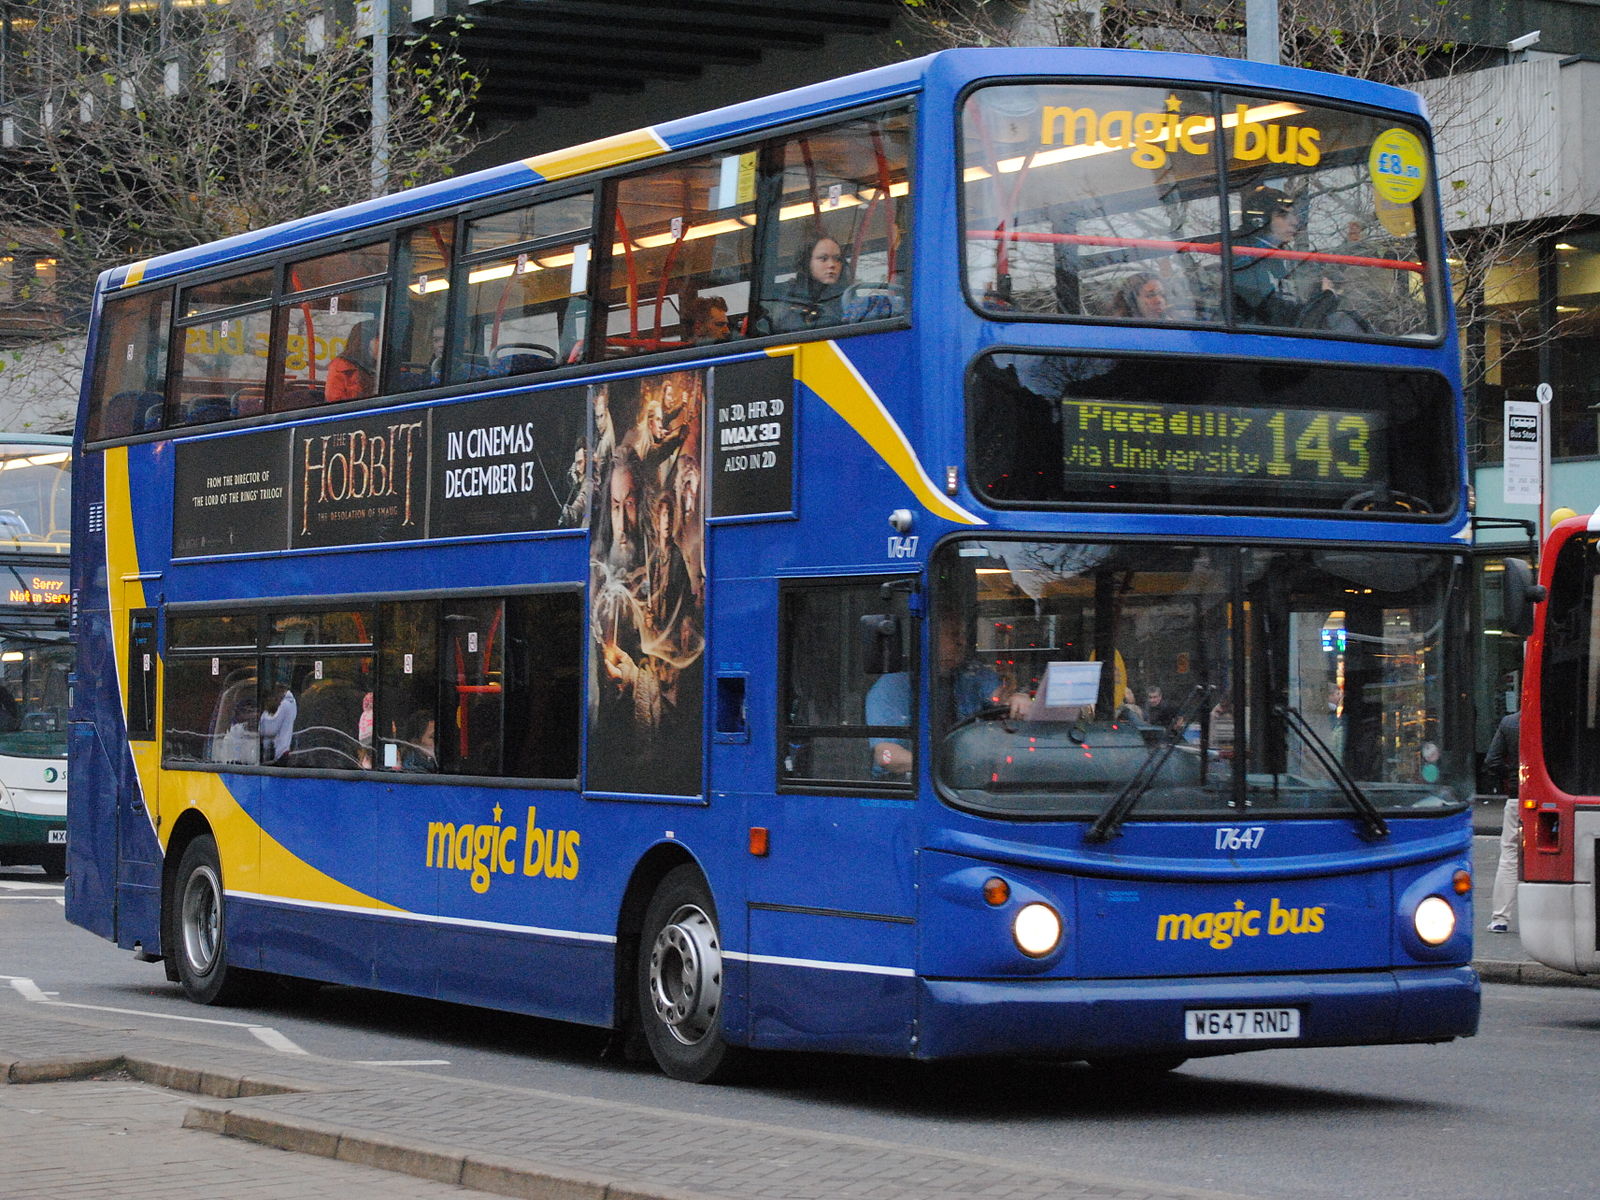 Stagecoach launches new ticket for flexible workers &#8211; cutting travel costs by 20%, The Manc